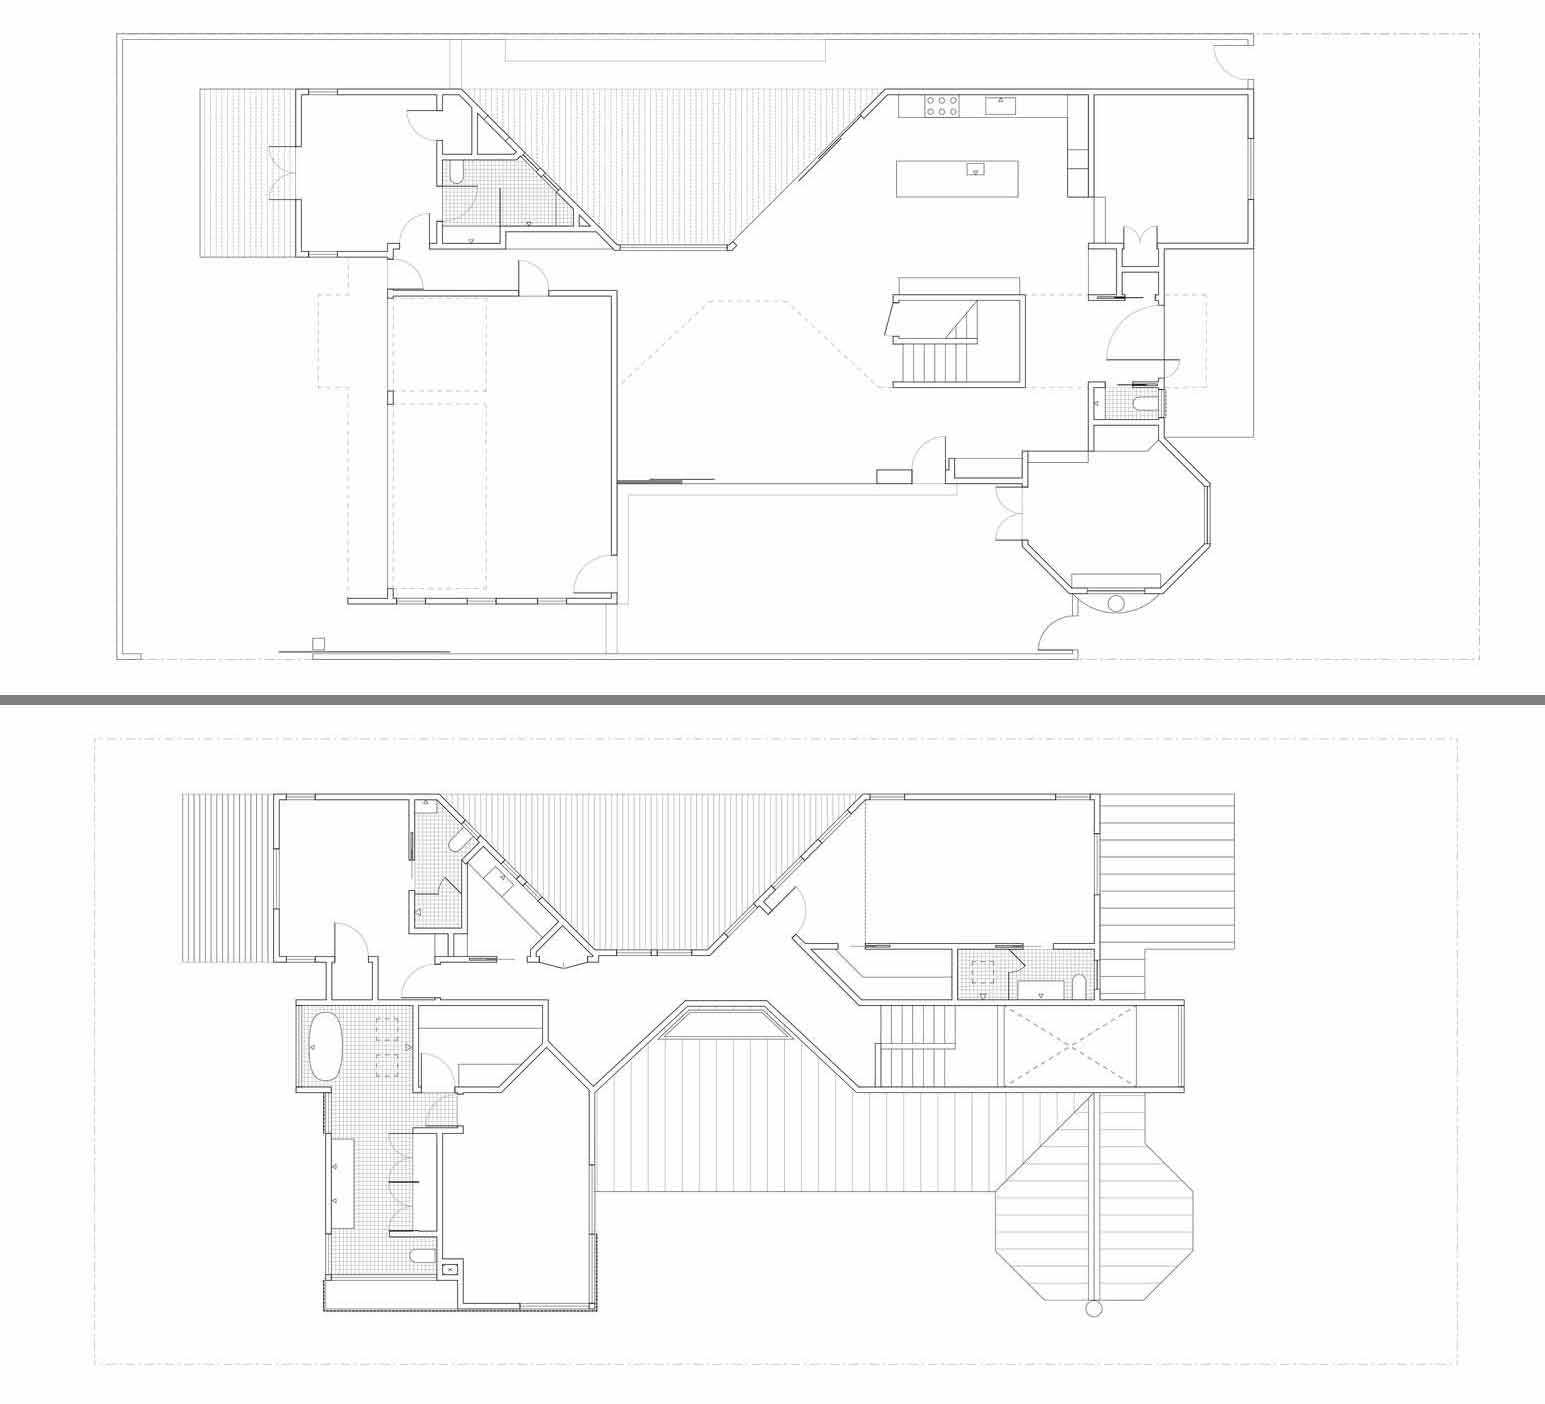 Architectural drawings of a modern house.